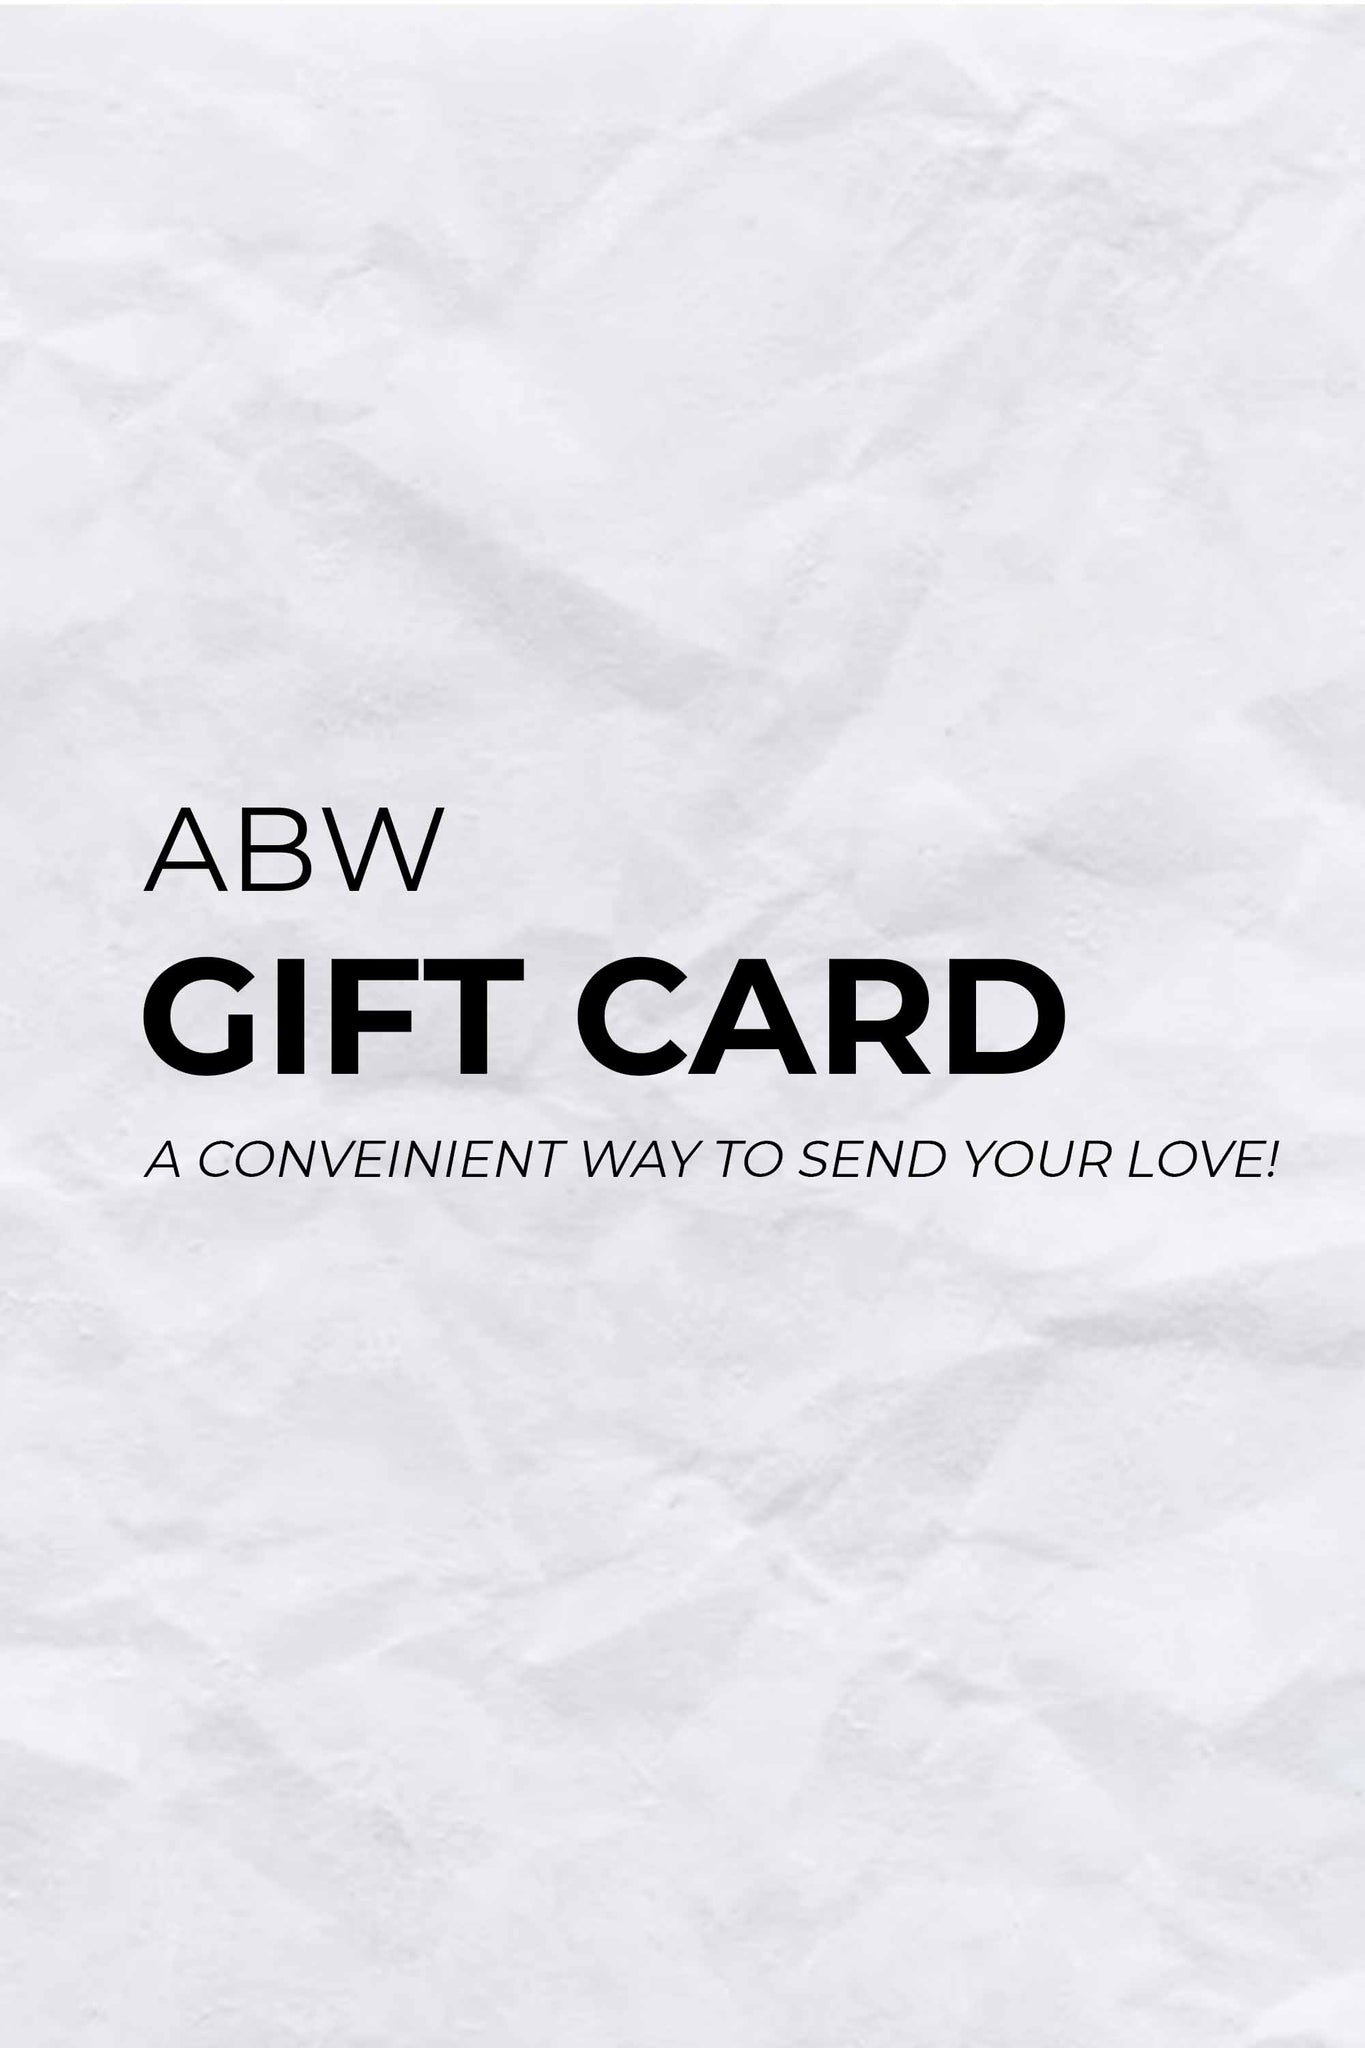 ABW GIFT CARD